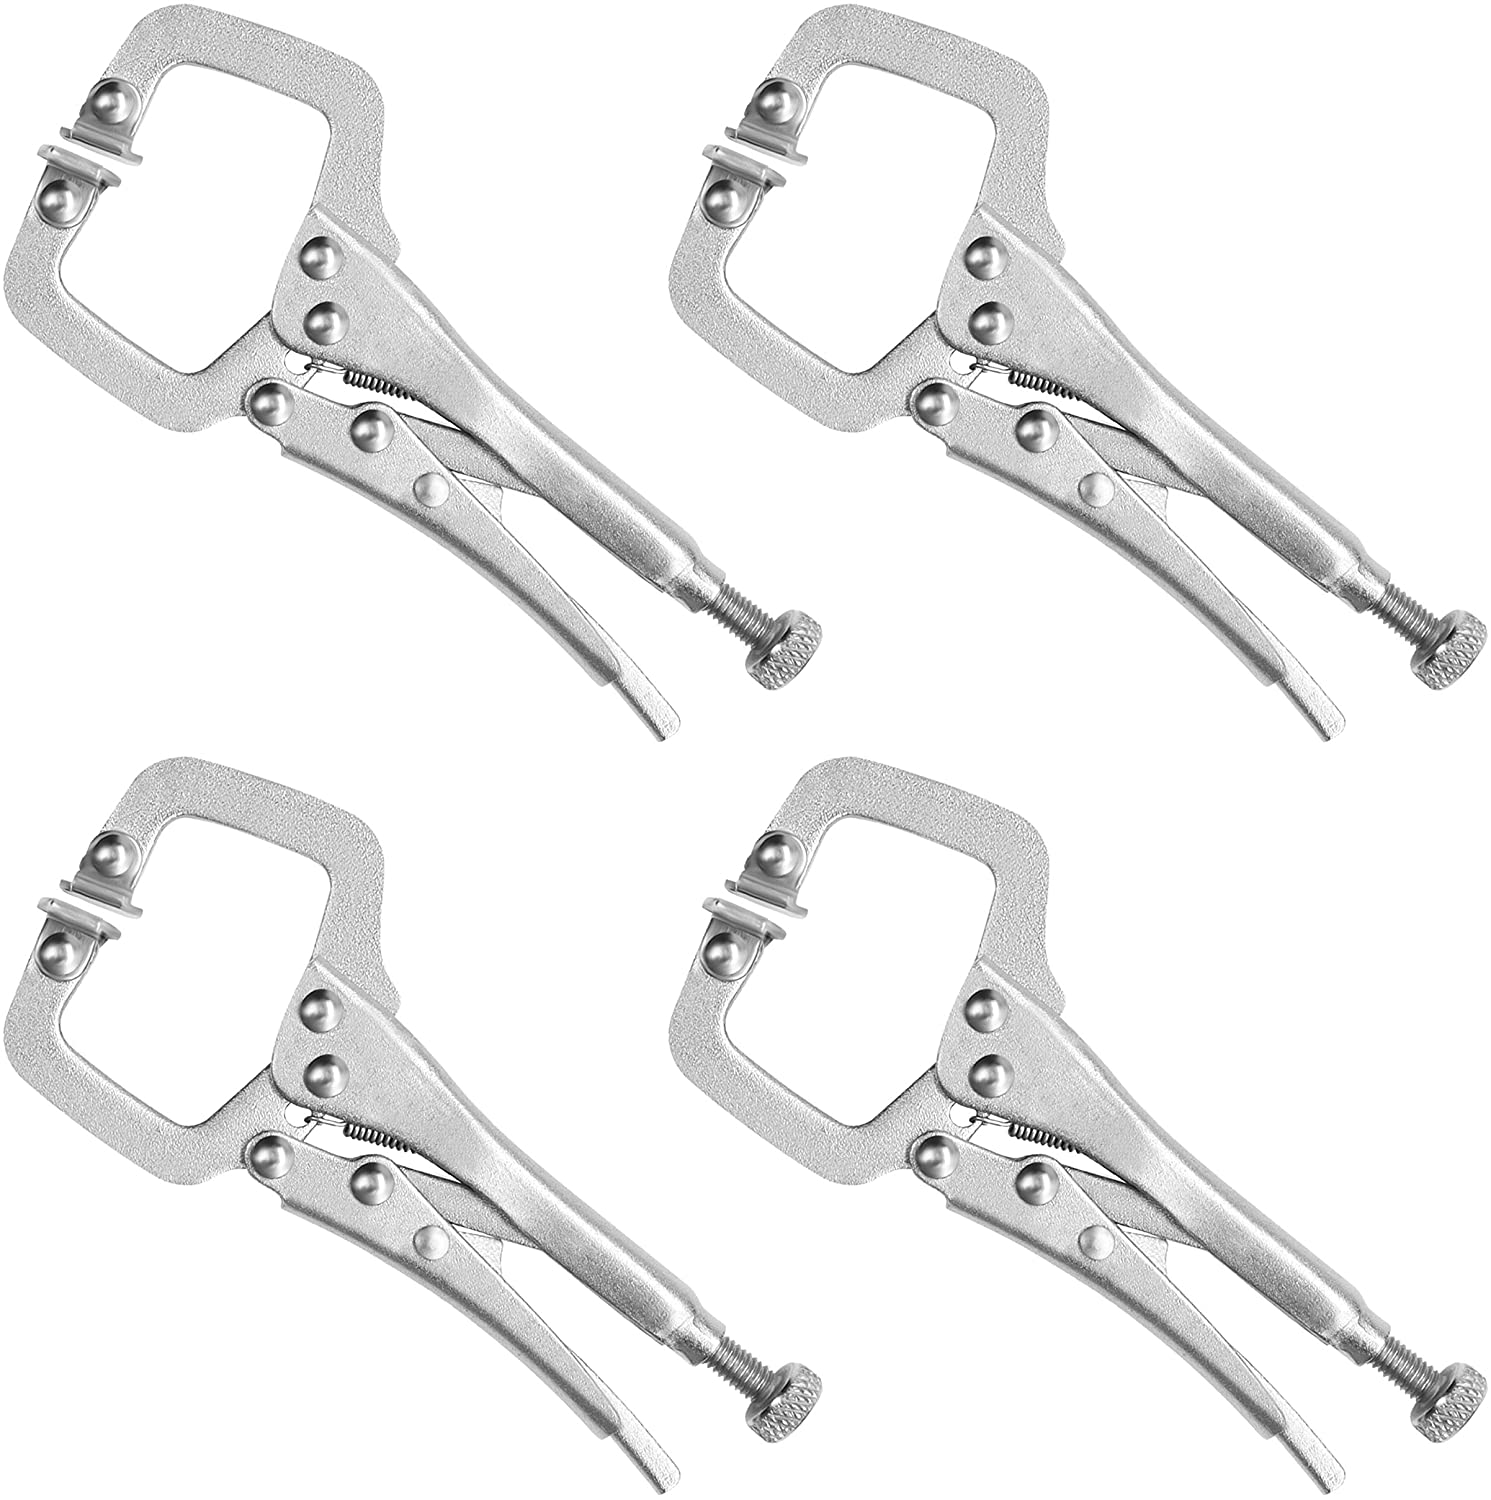  Metal Grip Locking C Clamp Pliers with Adjustable Screw and Swivel Pads (4 Pack) - Mini Easy and Quick Release Welding Pliers for Uneven Surfaces, Angles, Crafts & Hobbies 